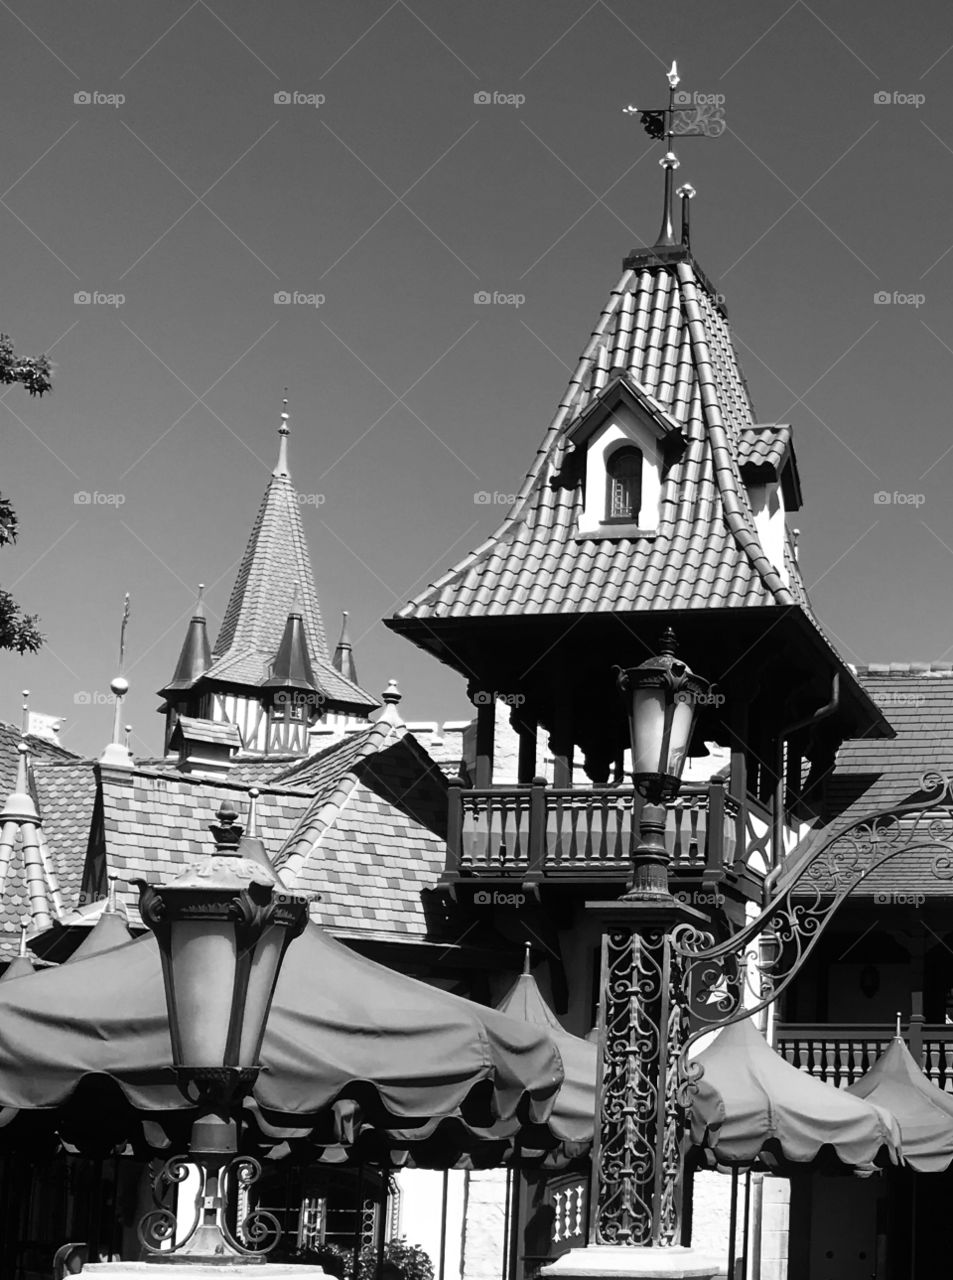 Rooftop images of European architecture. Pinocchio house in Walt Disney World. Black and white architecture. 